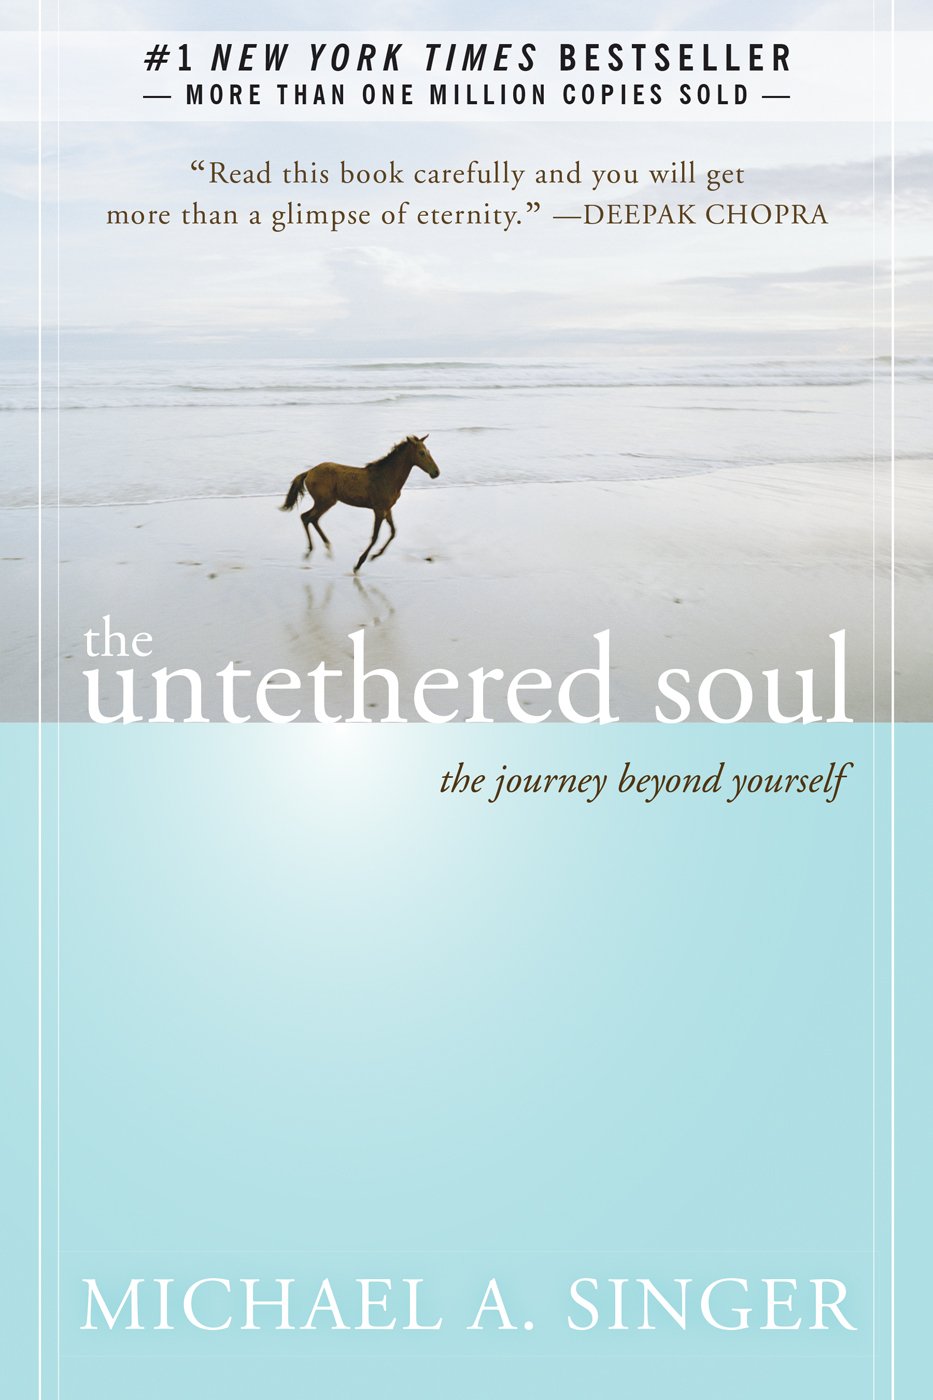 the untethered soul - meditation book